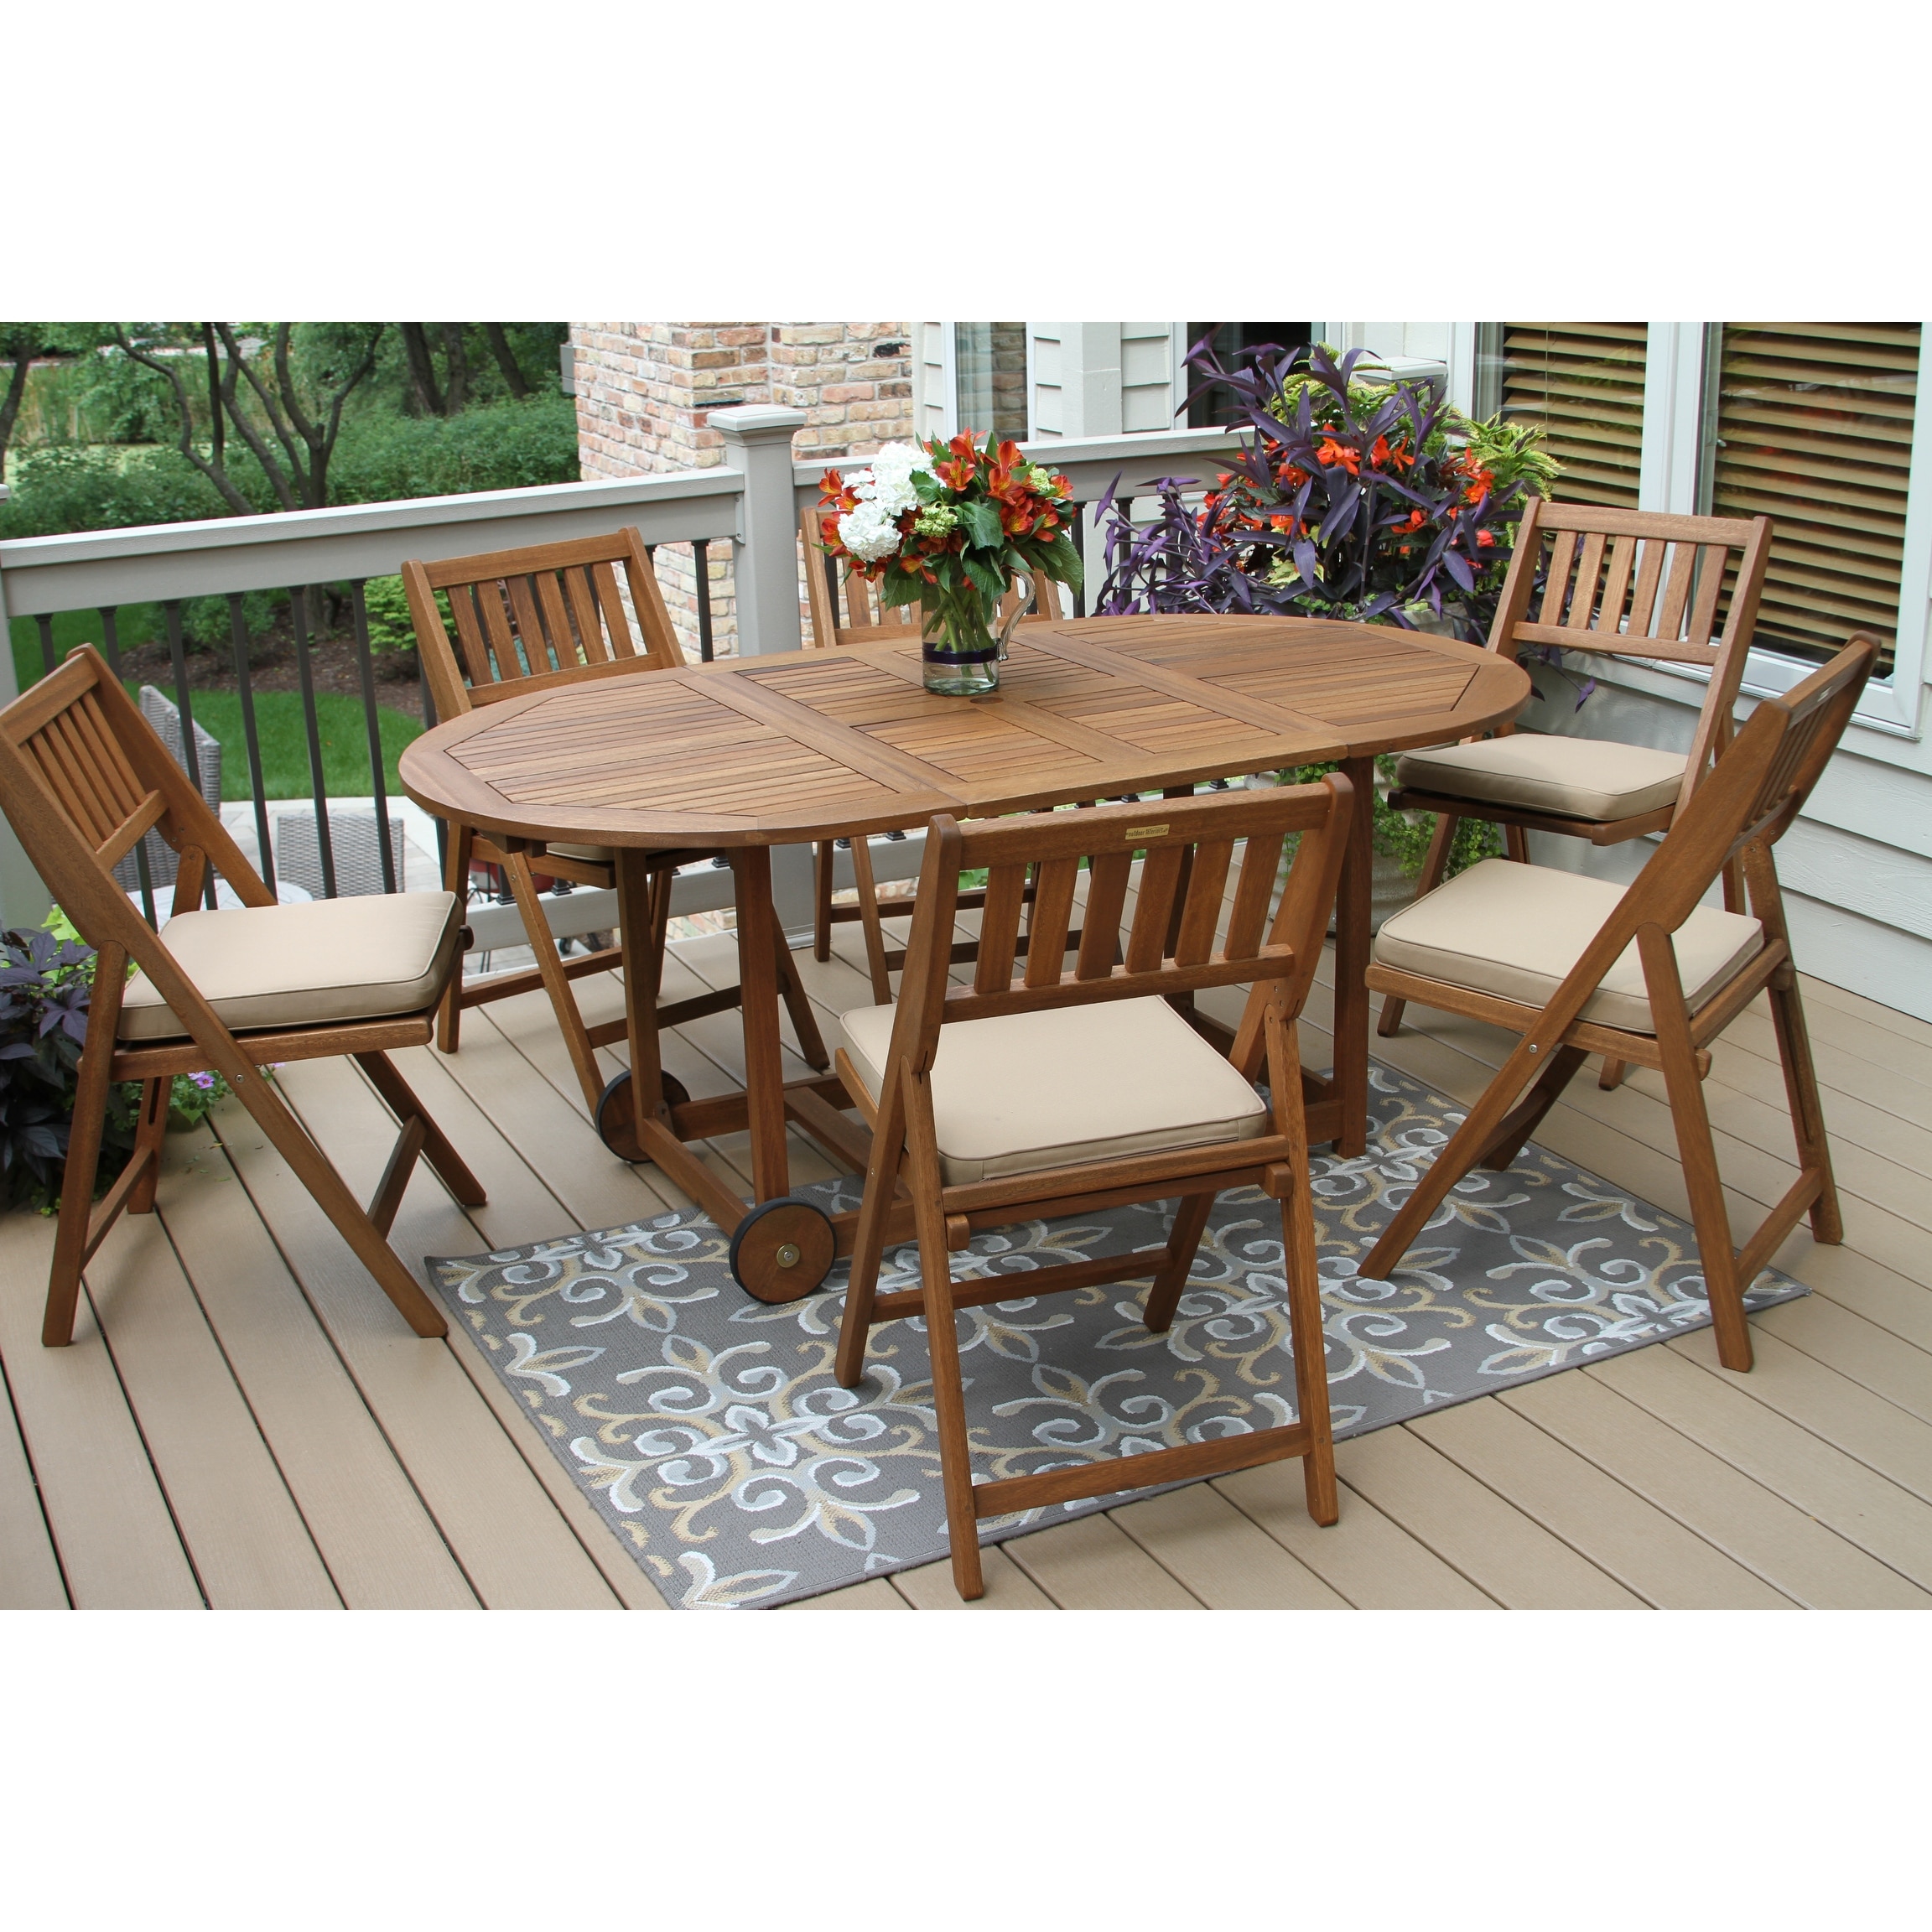 Eilaf 7pc Eucalyptus Fold And Store Dining Set